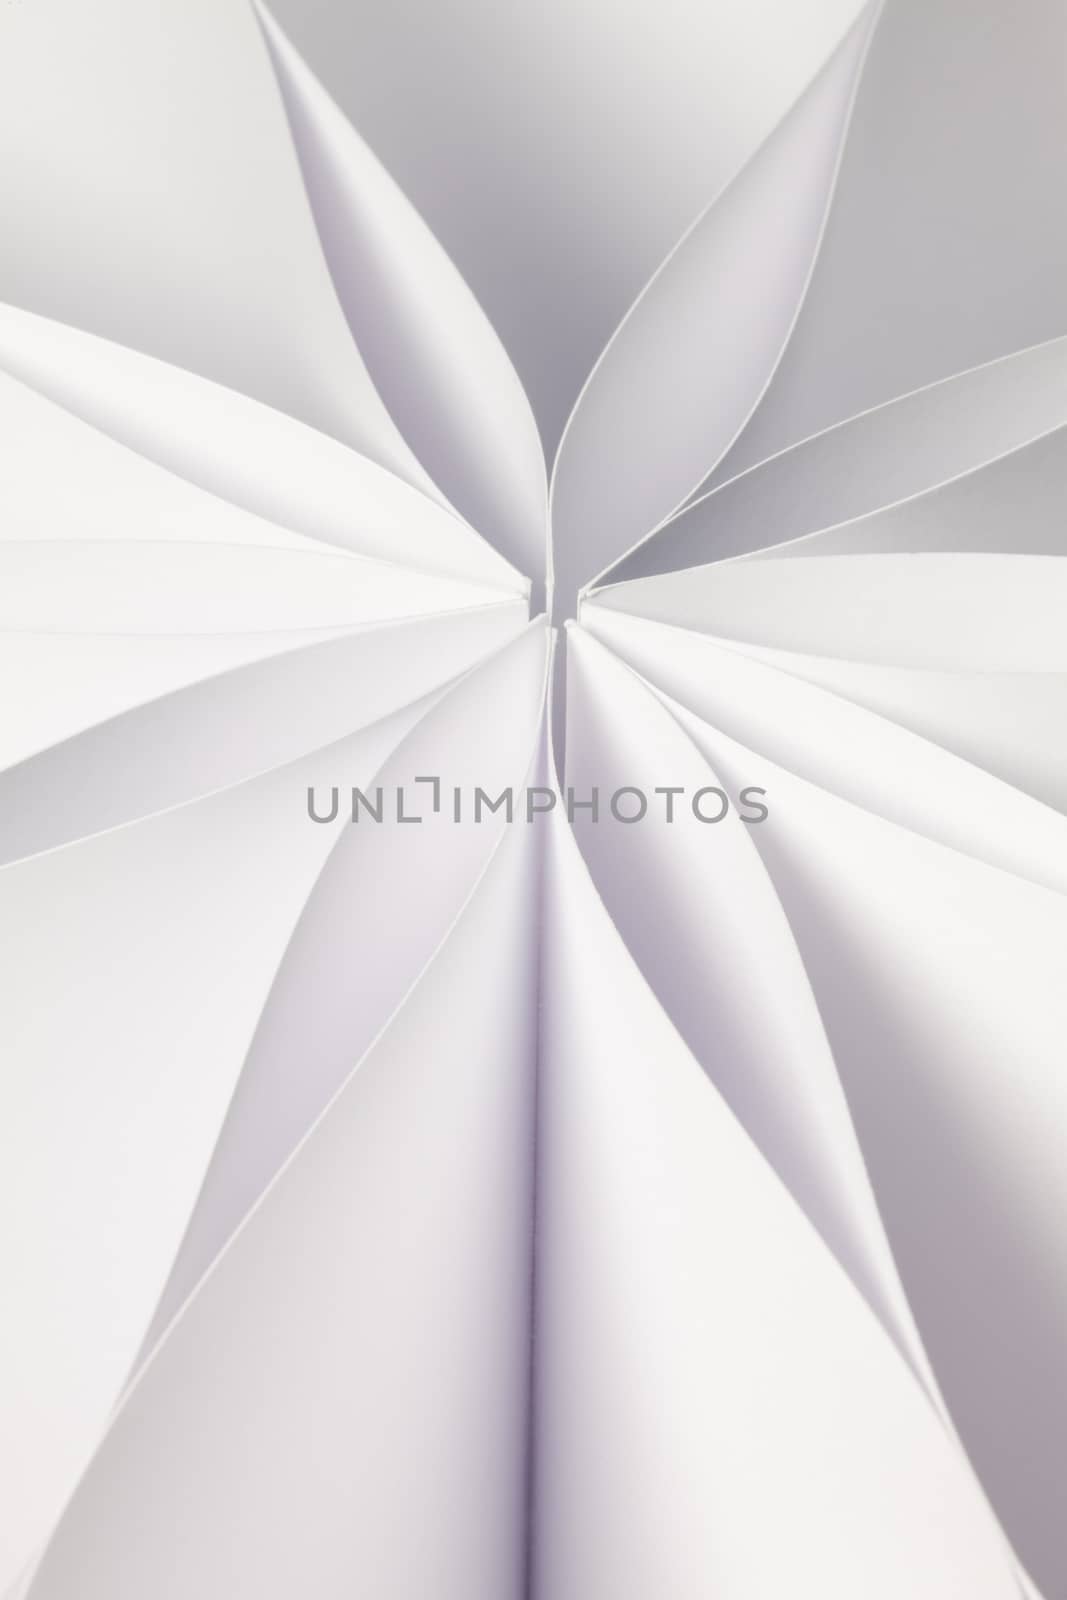 Abstract background image of pattern made by curved paper.